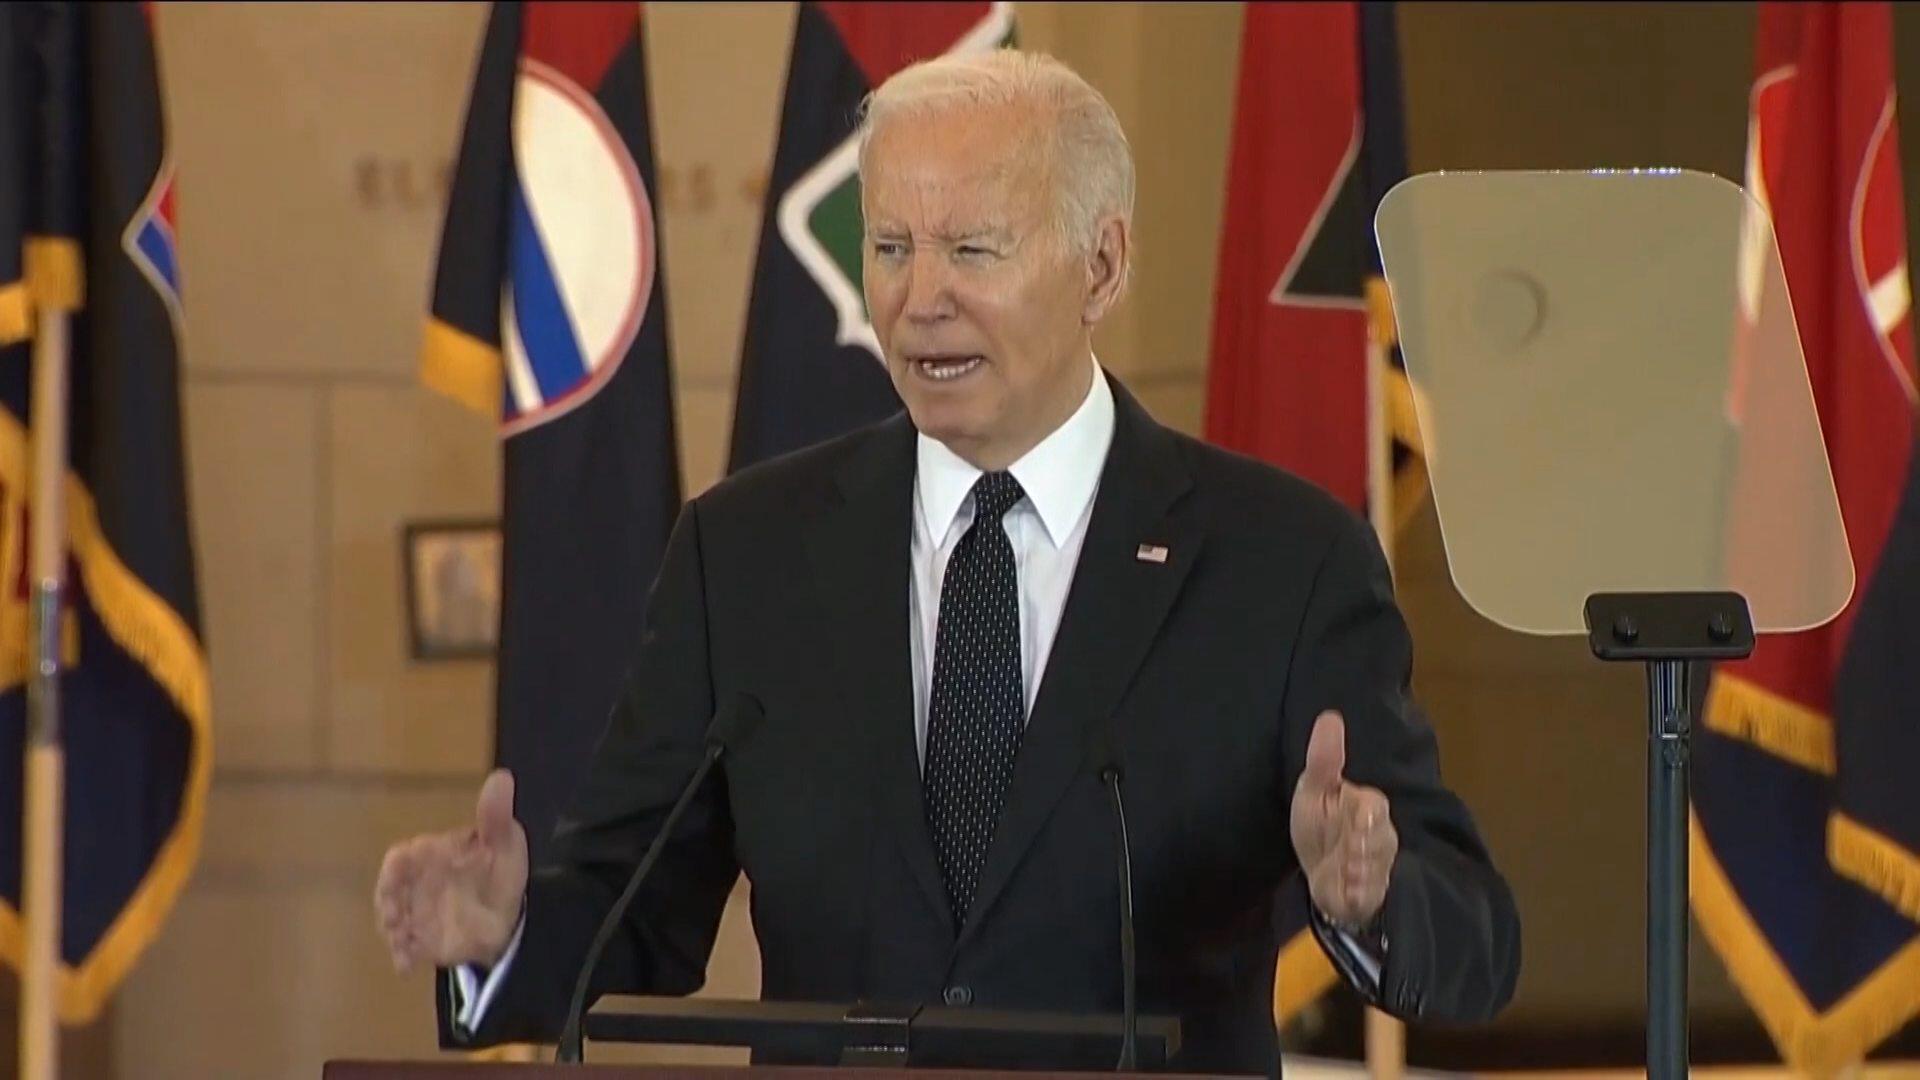 Biden Condemns Violence, Antisemitism During Annual Holocaust Remembrance Ceremony